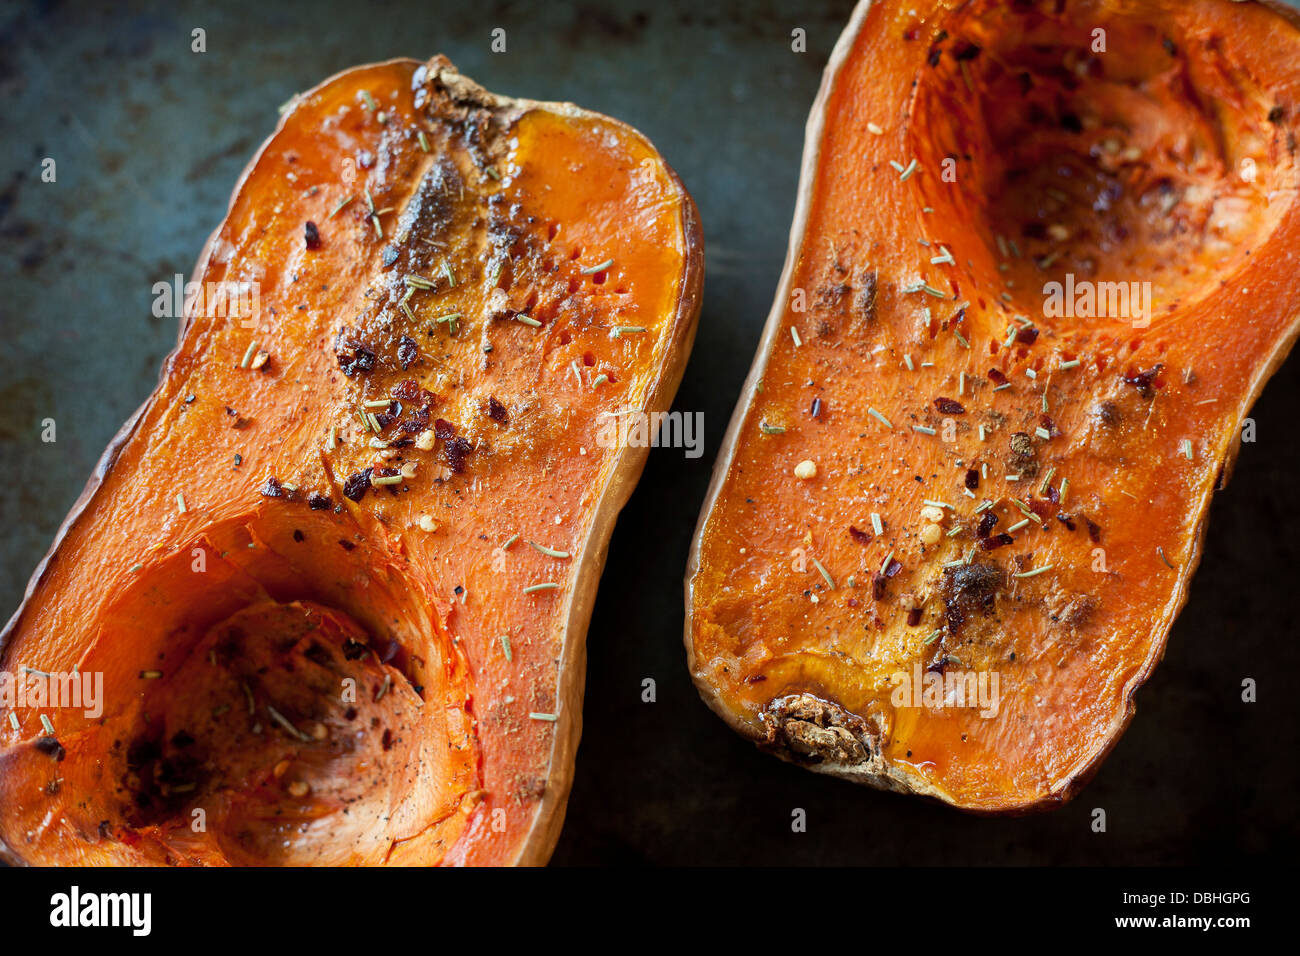 Cooked and seasoned butternut squash on a baking sheet, rustic delicious food. Stock Photo